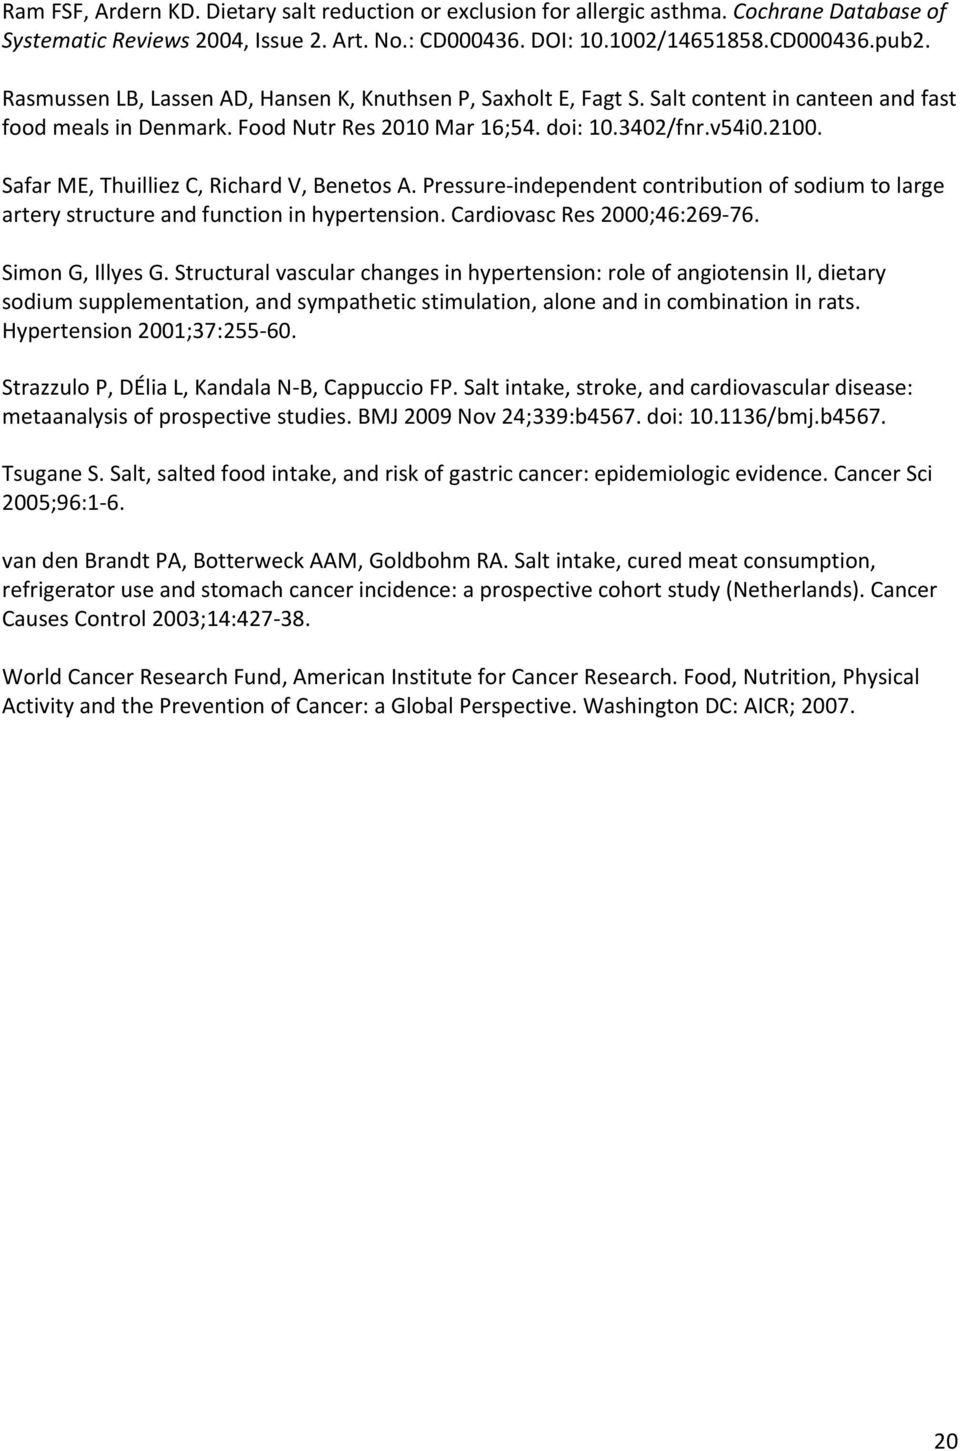 Safar ME, Thuilliez C, Richard V, Benetos A. Pressure-independent contribution of sodium to large artery structure and function in hypertension. Cardiovasc Res 2000;46:269-76. Simon G, Illyes G.